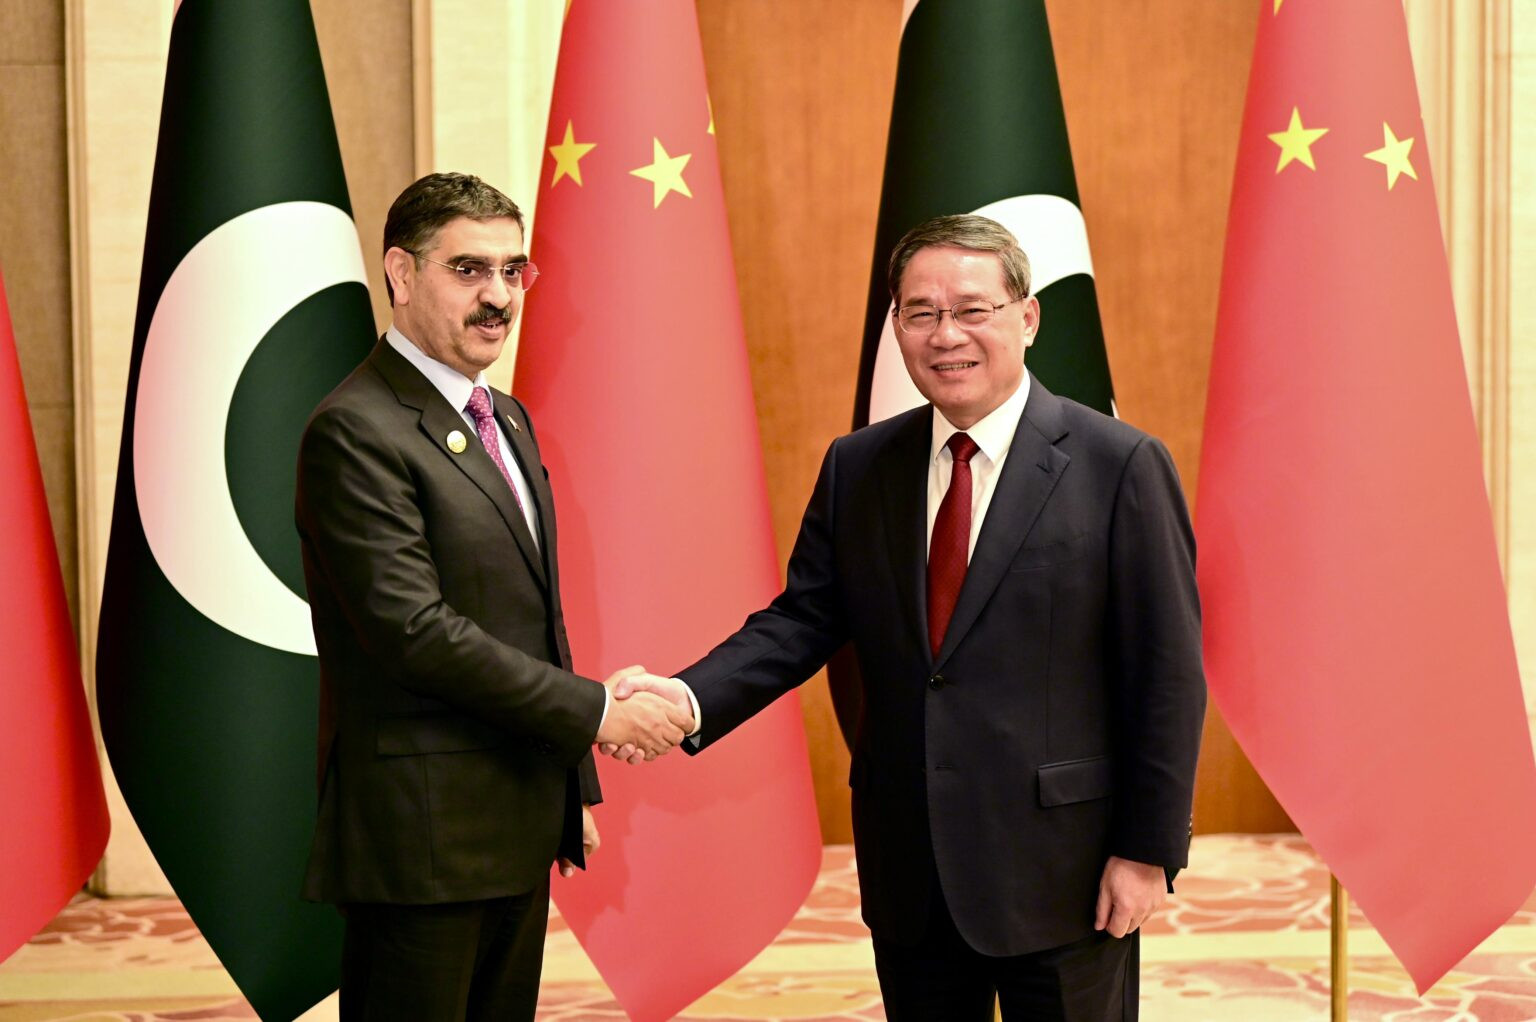 caretaker prime minister anwaarul haq kakar extends felicitations to the chinese leadership on the successful holding of the third belt and road forum photo app